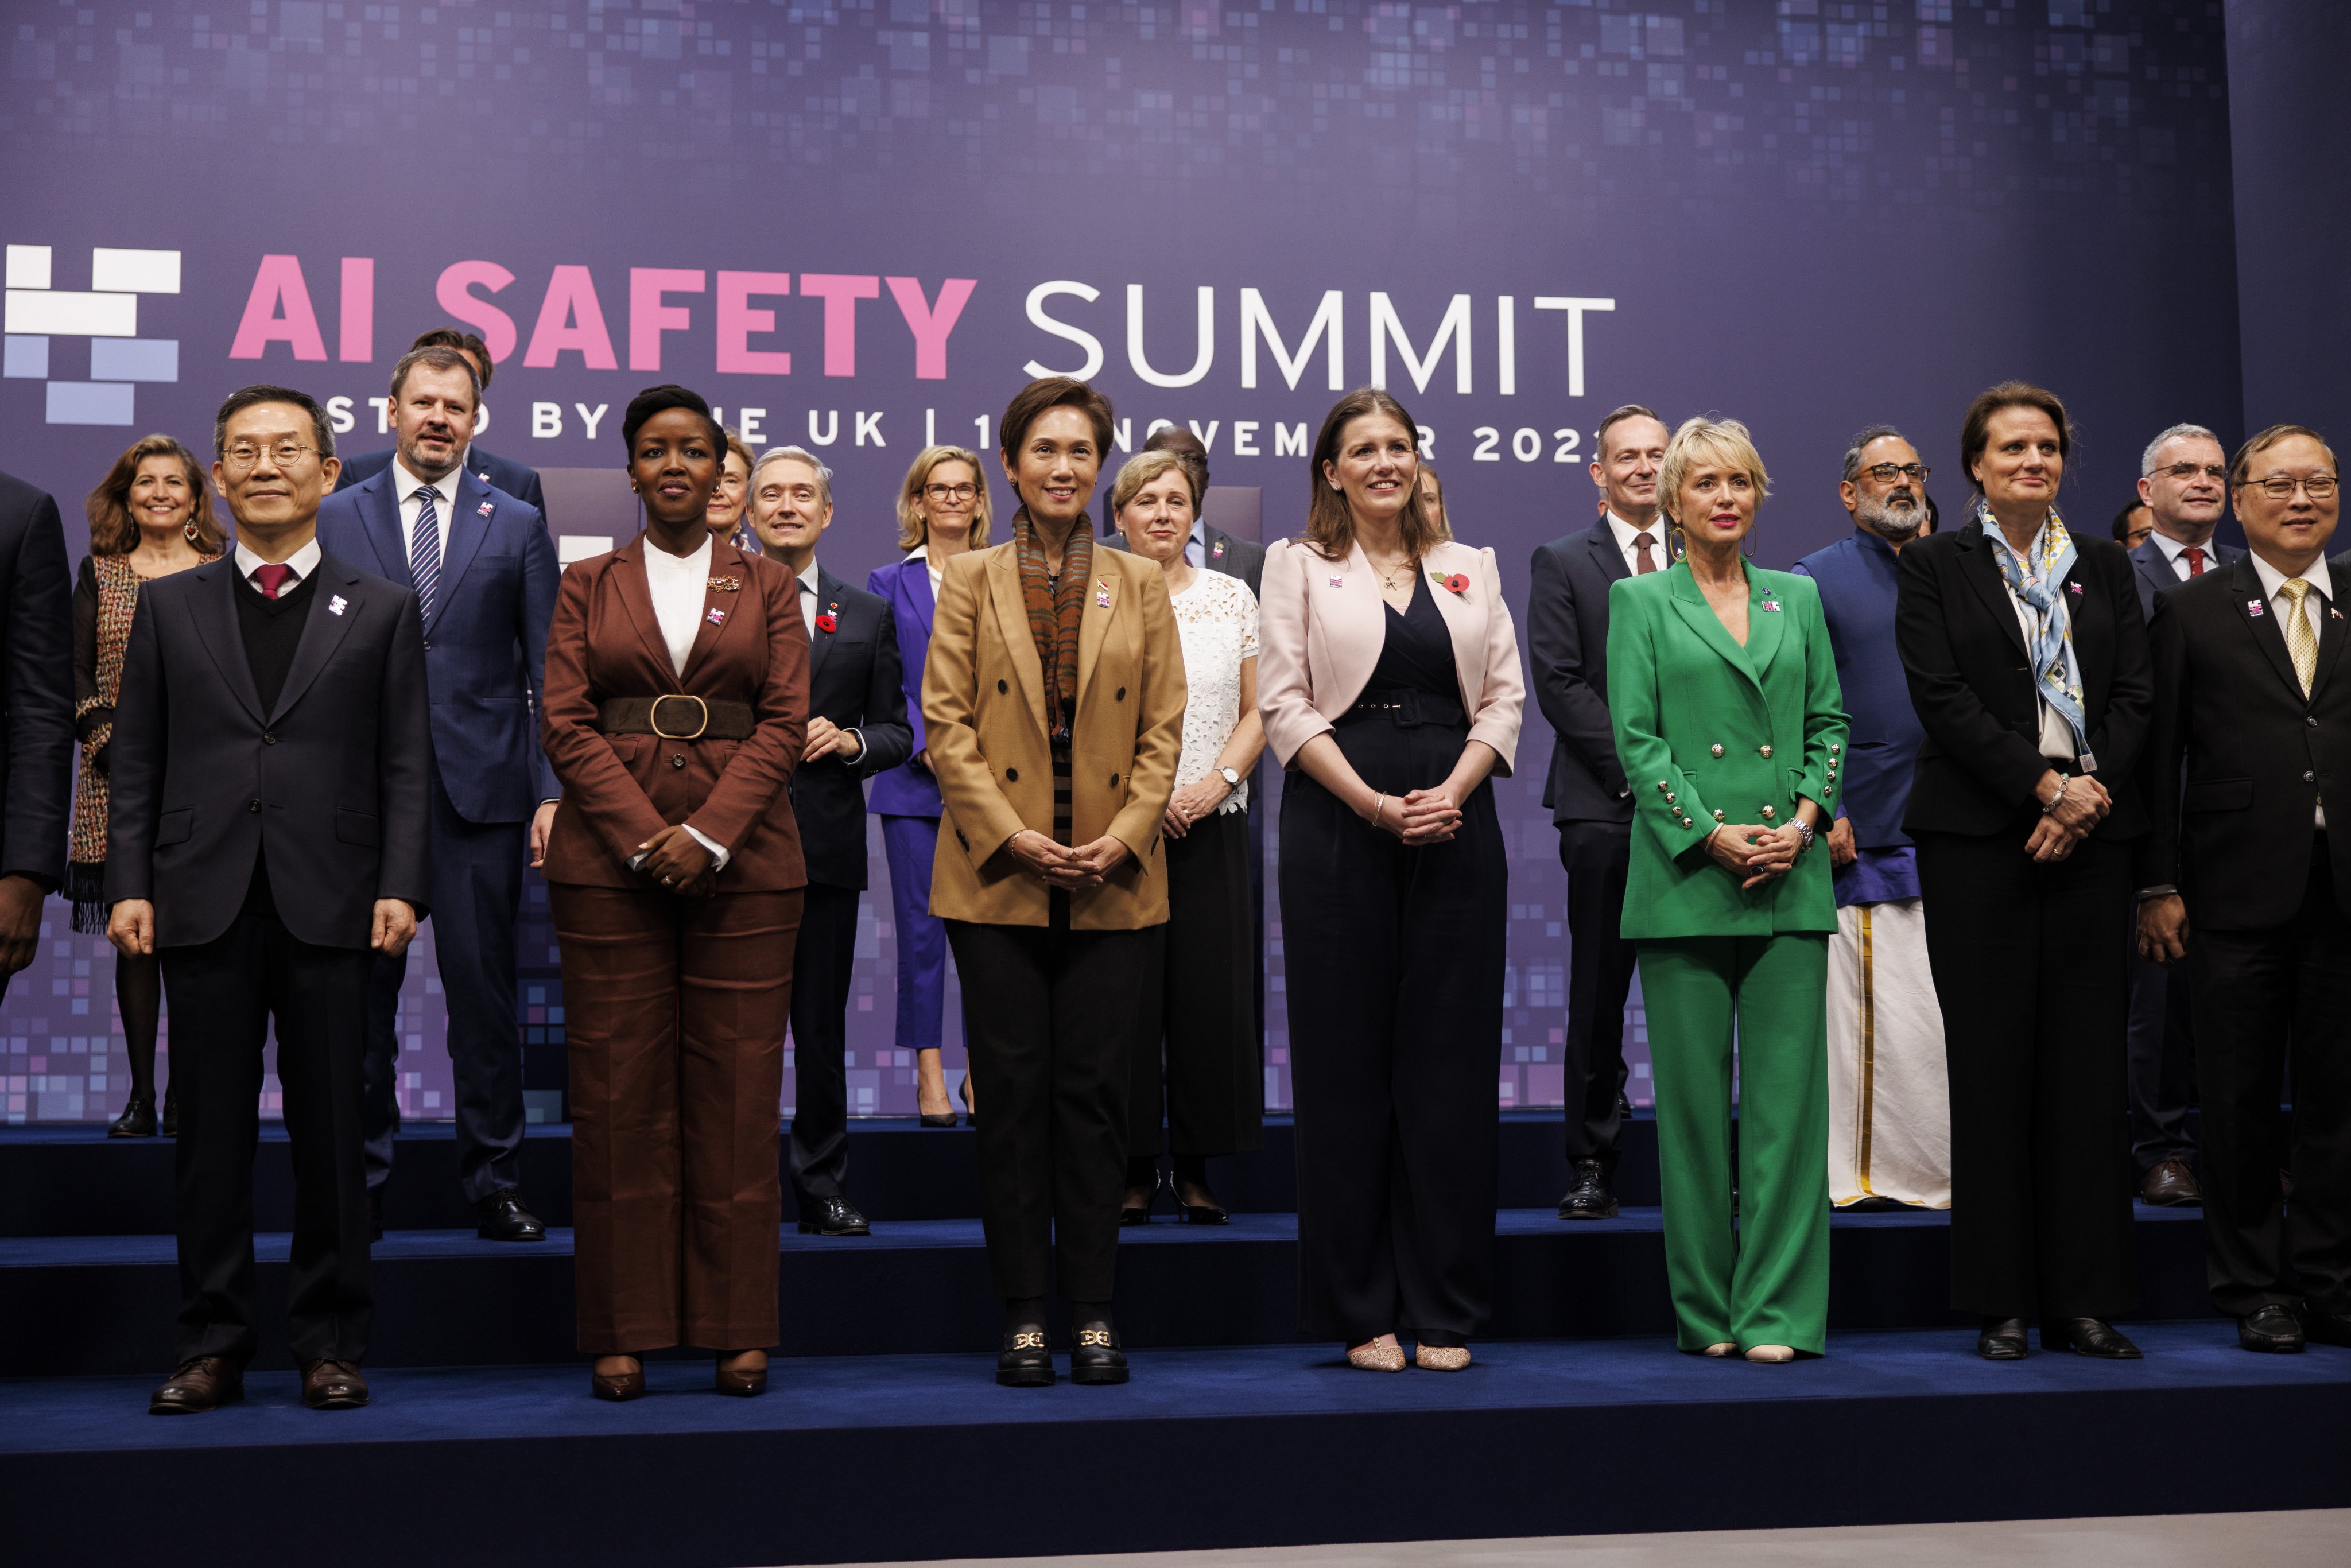 Ministers from participating countries pose for a photo on the first day of the AI Safety Summit 2023 in Britain on Wednesday. Photo: EPA-EFE